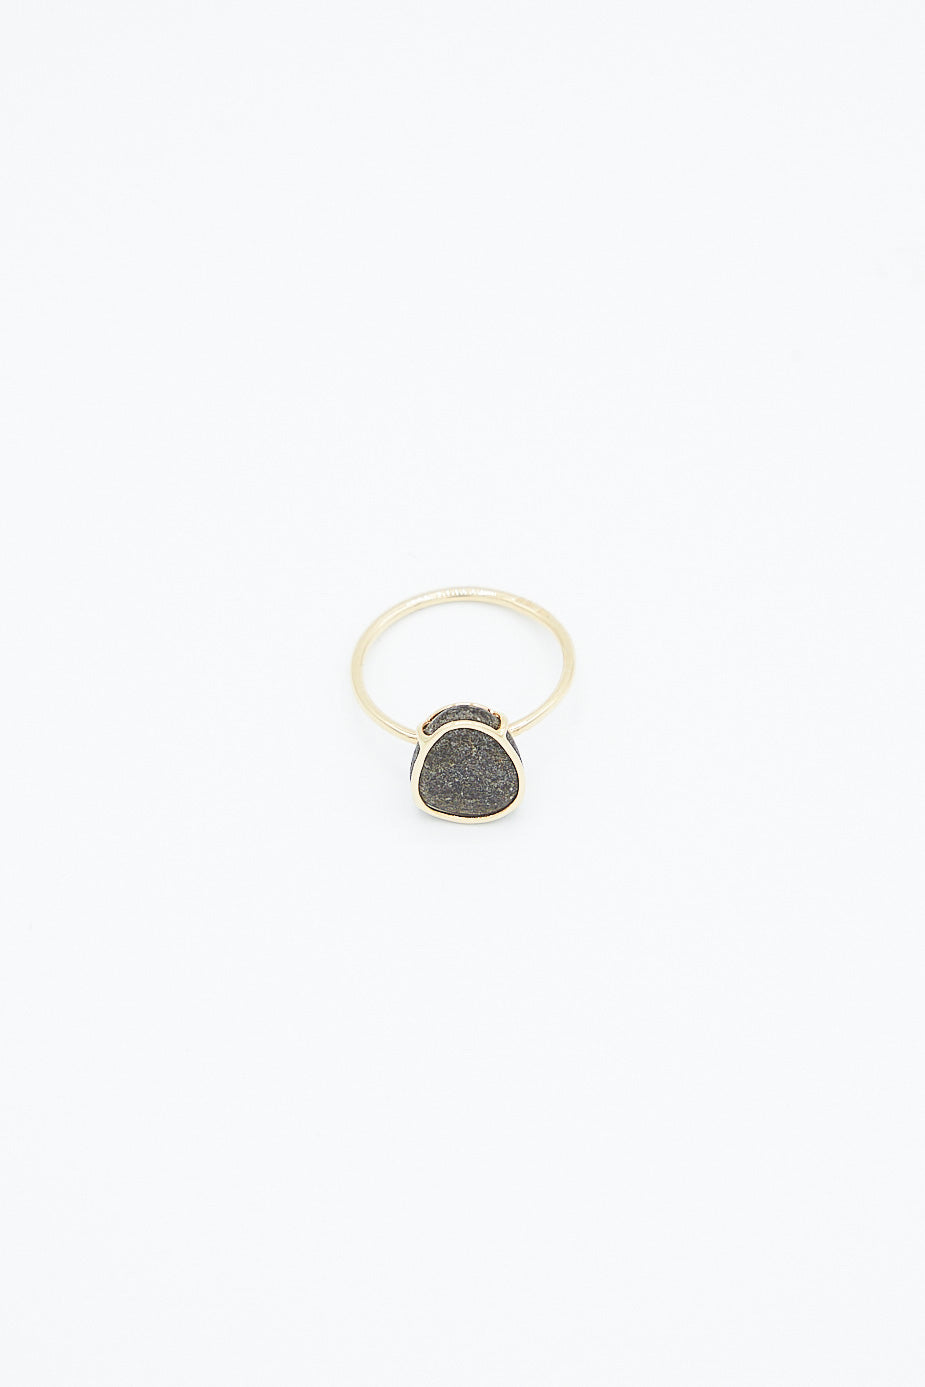 Handmade 14K Floating Ring in Island Stone with a black druzy stone featuring Block Island stone and 14k gold, by Mary MacGill. Front view.